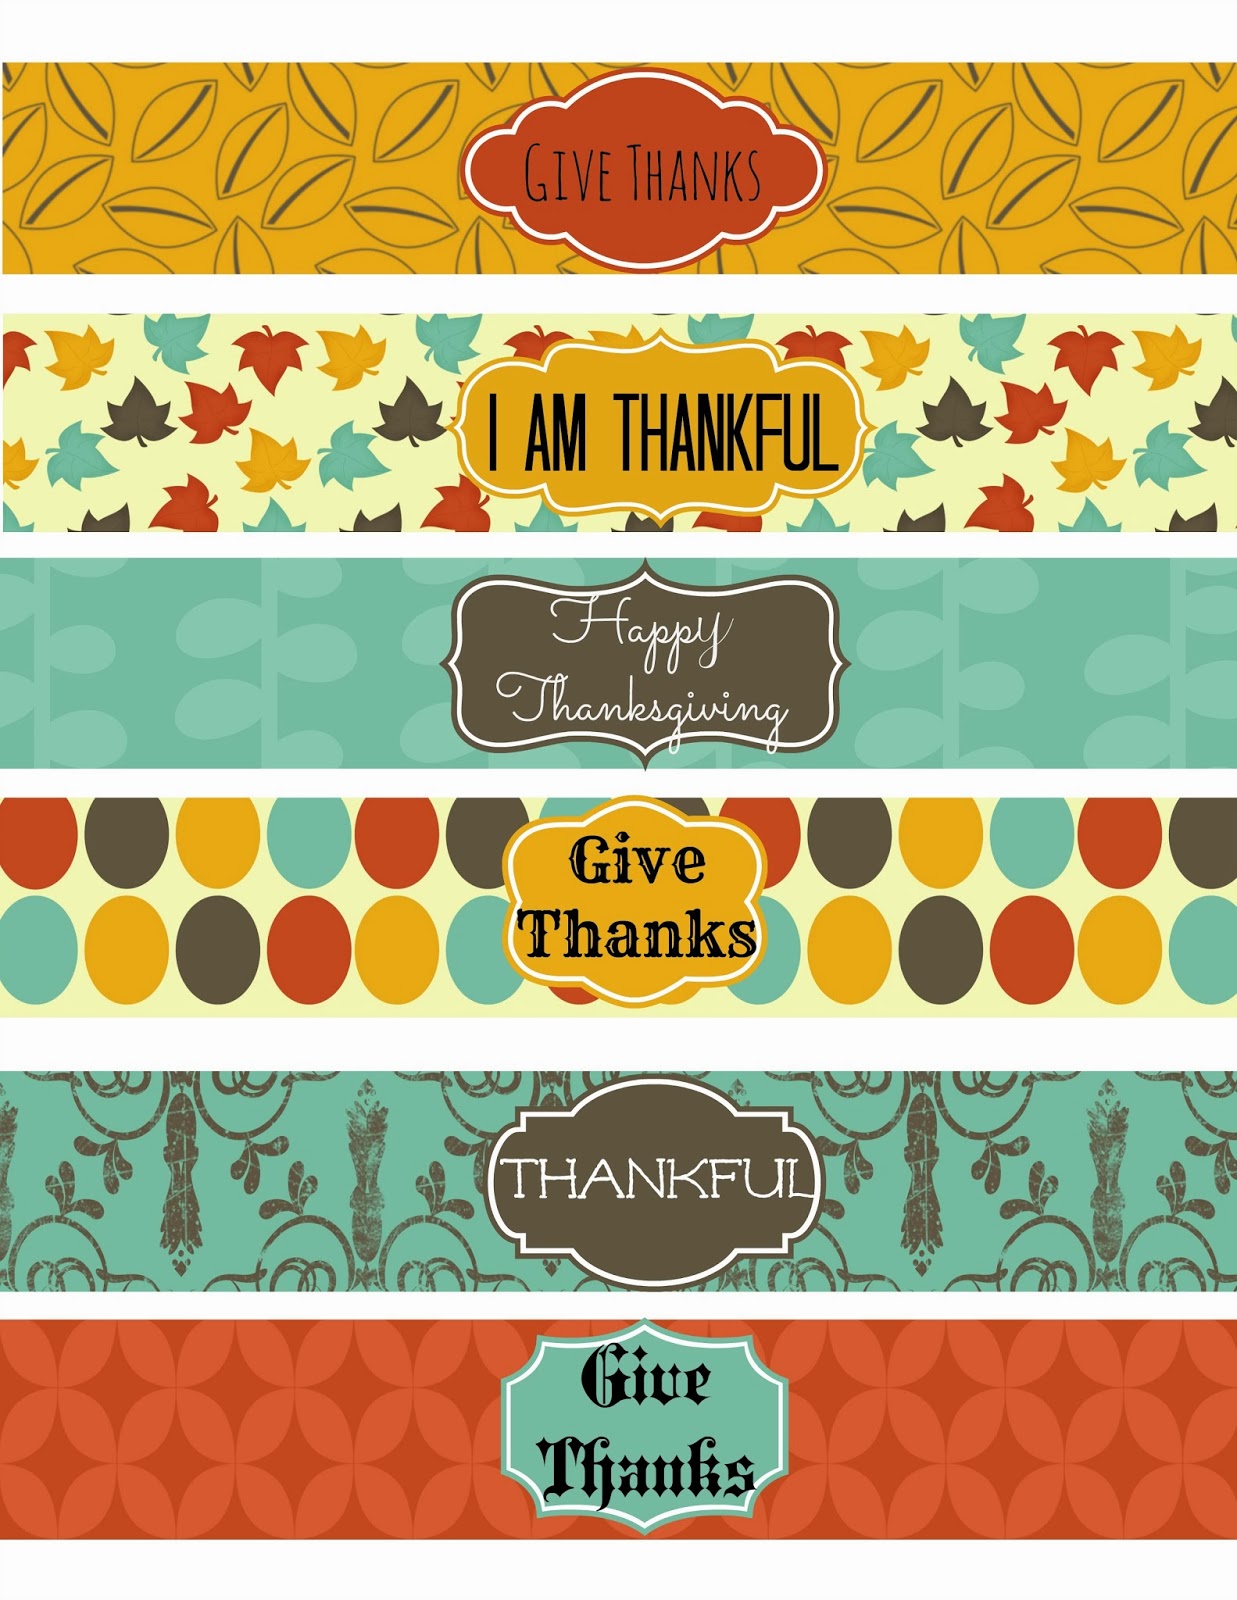 barb-camp-free-thanksgiving-party-printables-set-1